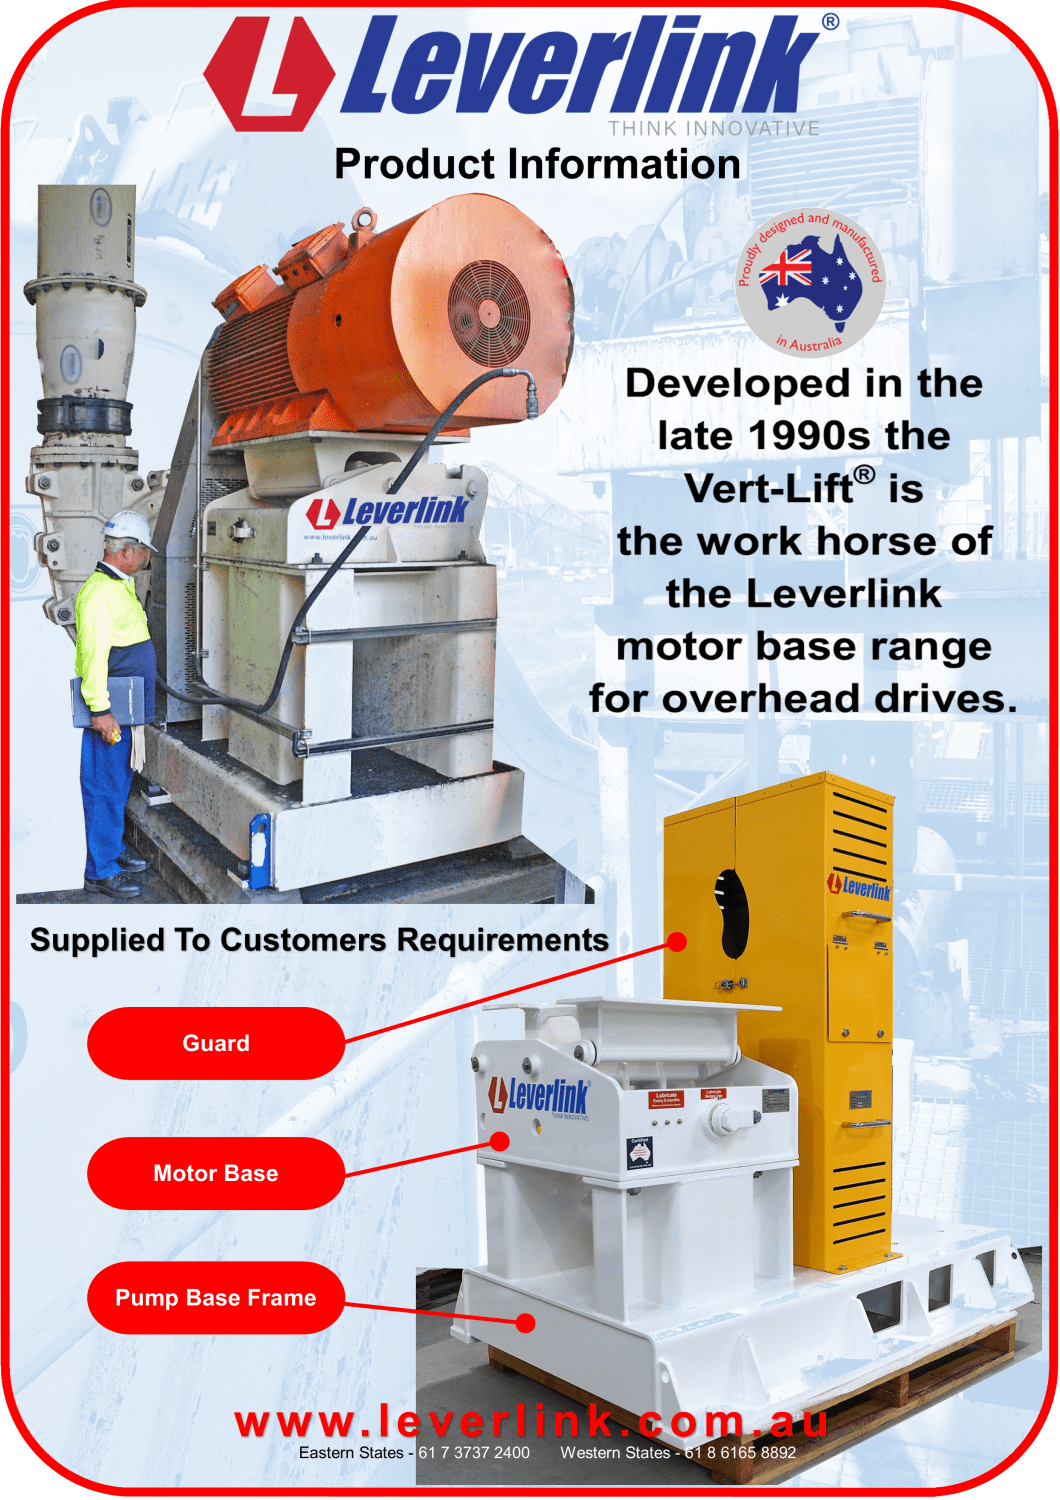 Developed in the late 1990s Verti-lift is the work horse of the Leverlink motor base range for overhead drives